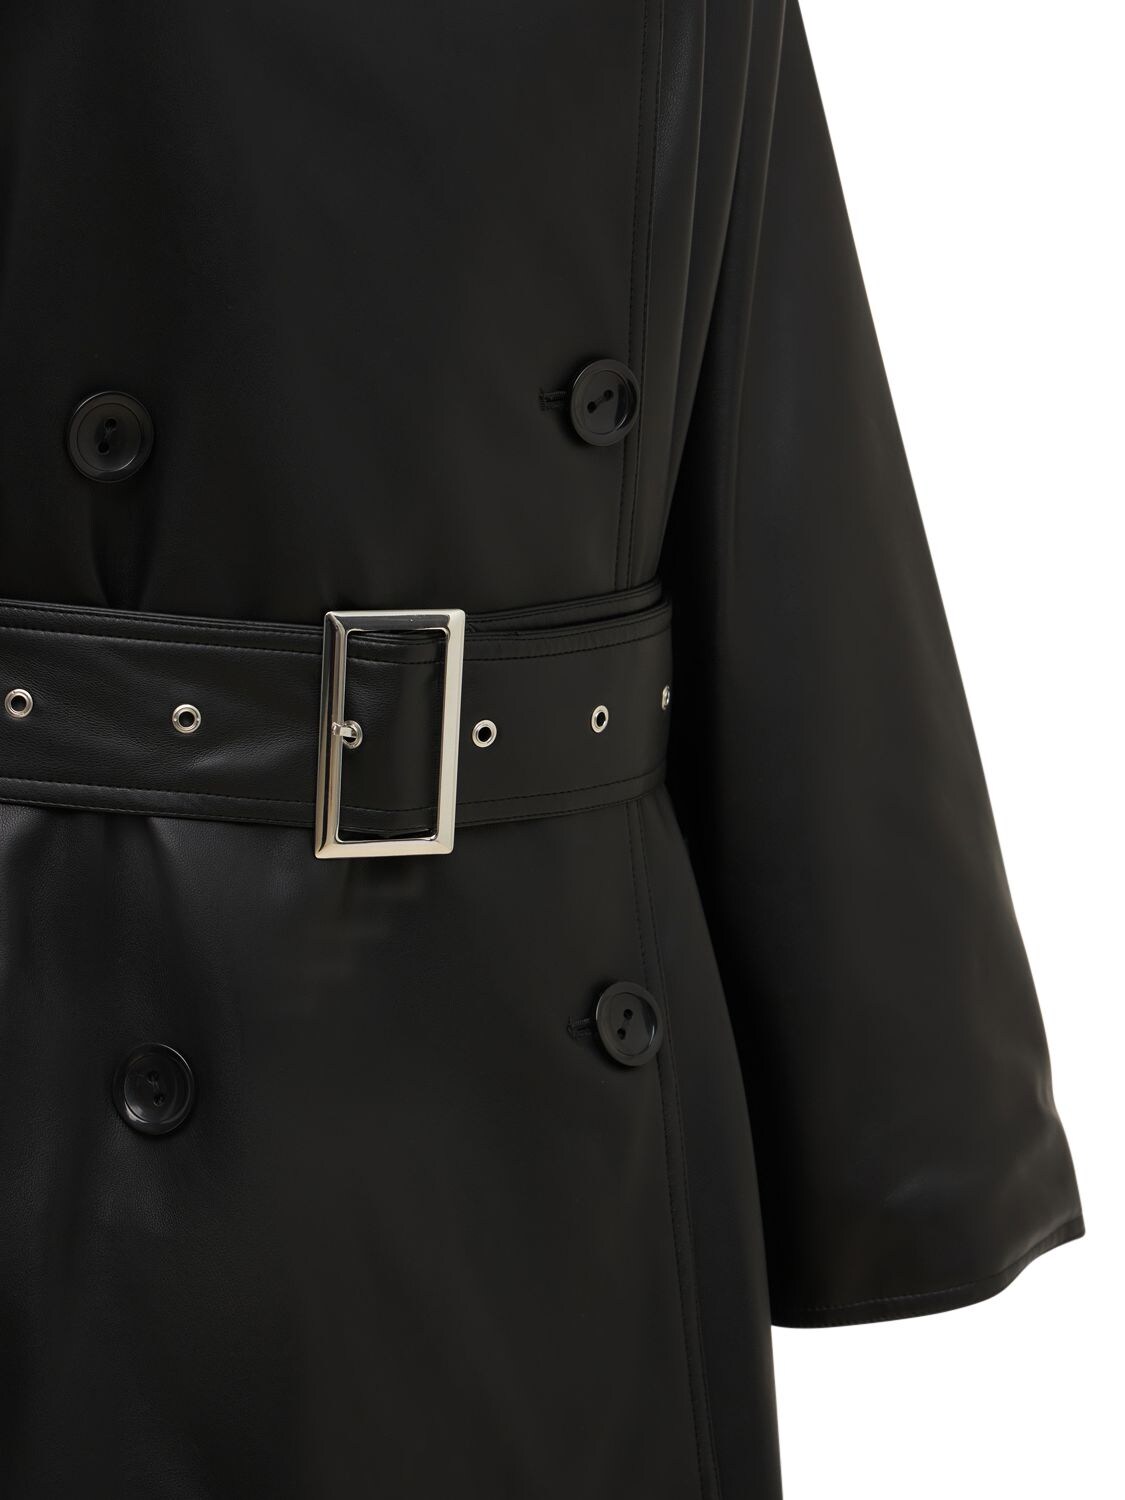 Stand Studio Hope Luscious Long Faux Leather Trench In Black 